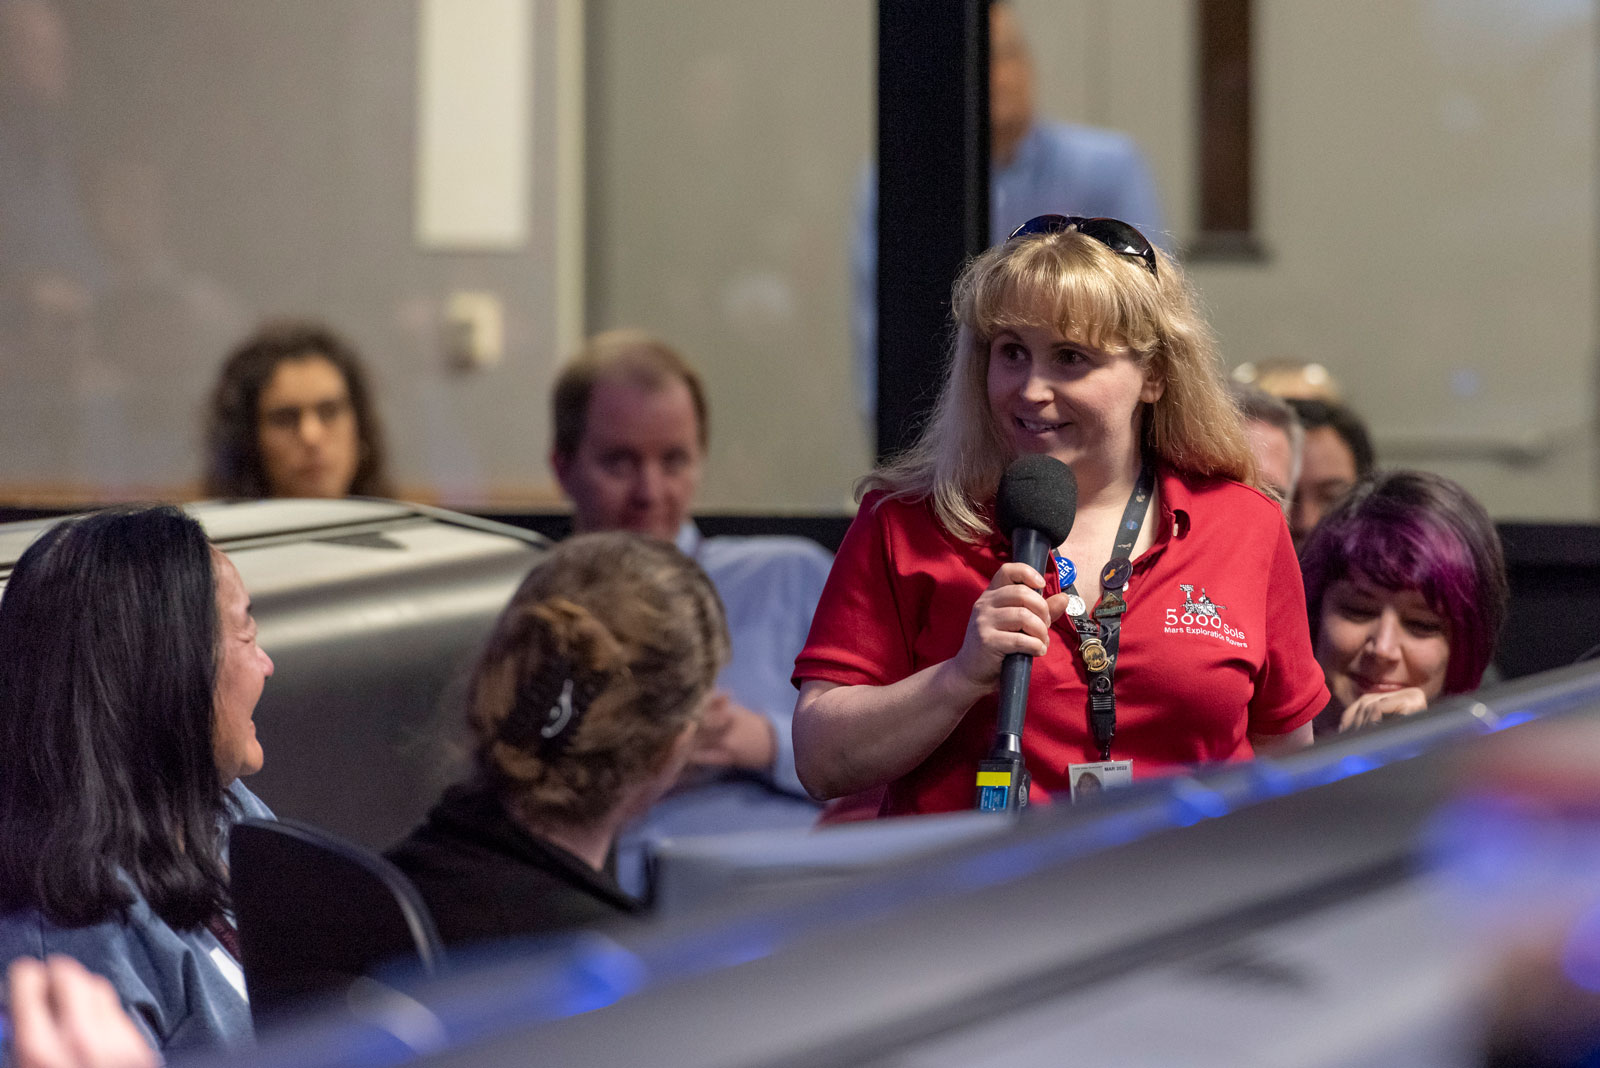 As the NASA Opportunity rover team gathered to talk about the last attempts to listen for the rover’s signals from Mars, Ashley Stroupe shared her story about working with the long-lived robotic geologist.